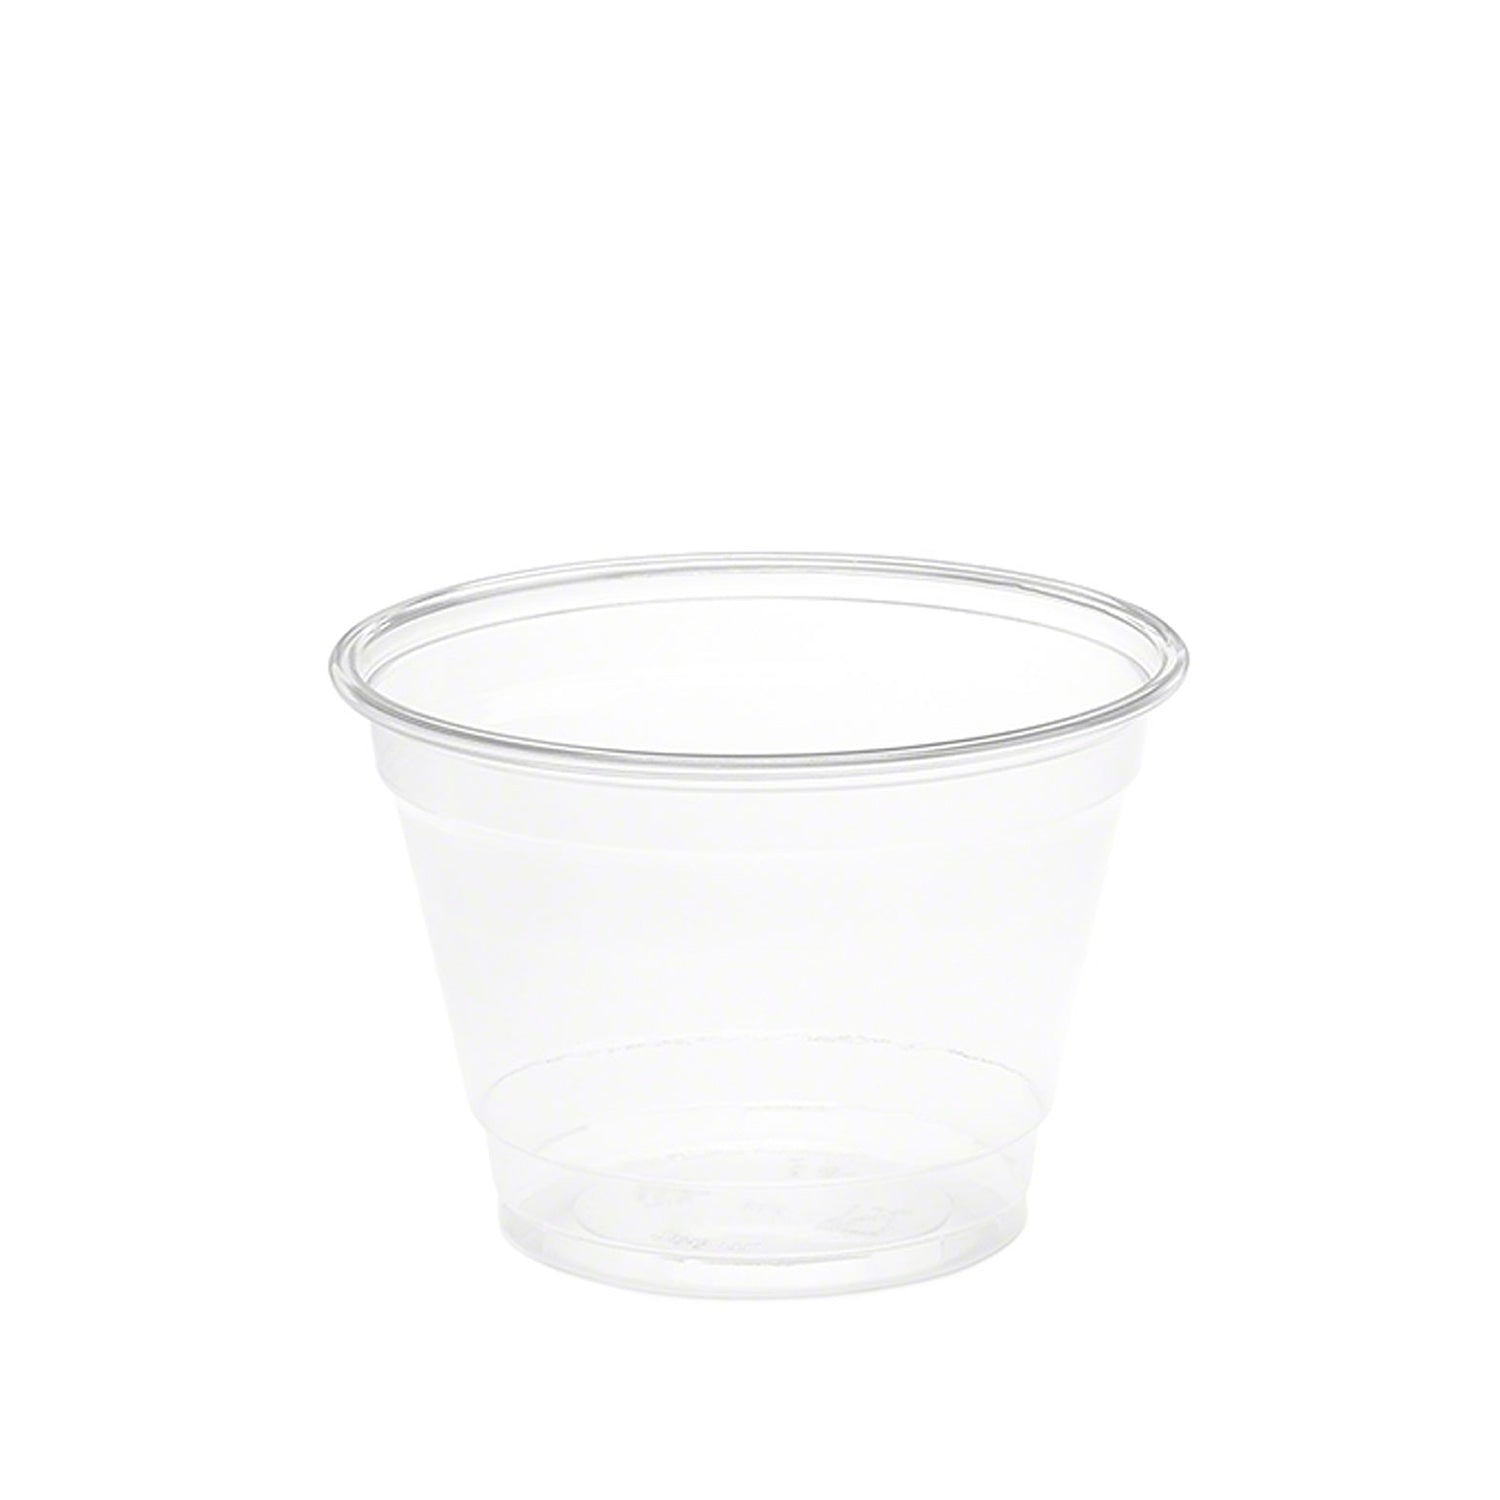 Visage Clear Plastic Top Hat 2-in-1 Straw or Sippy Cup Lid - Fits 9, 12 and 16 oz - 1000 Count Box